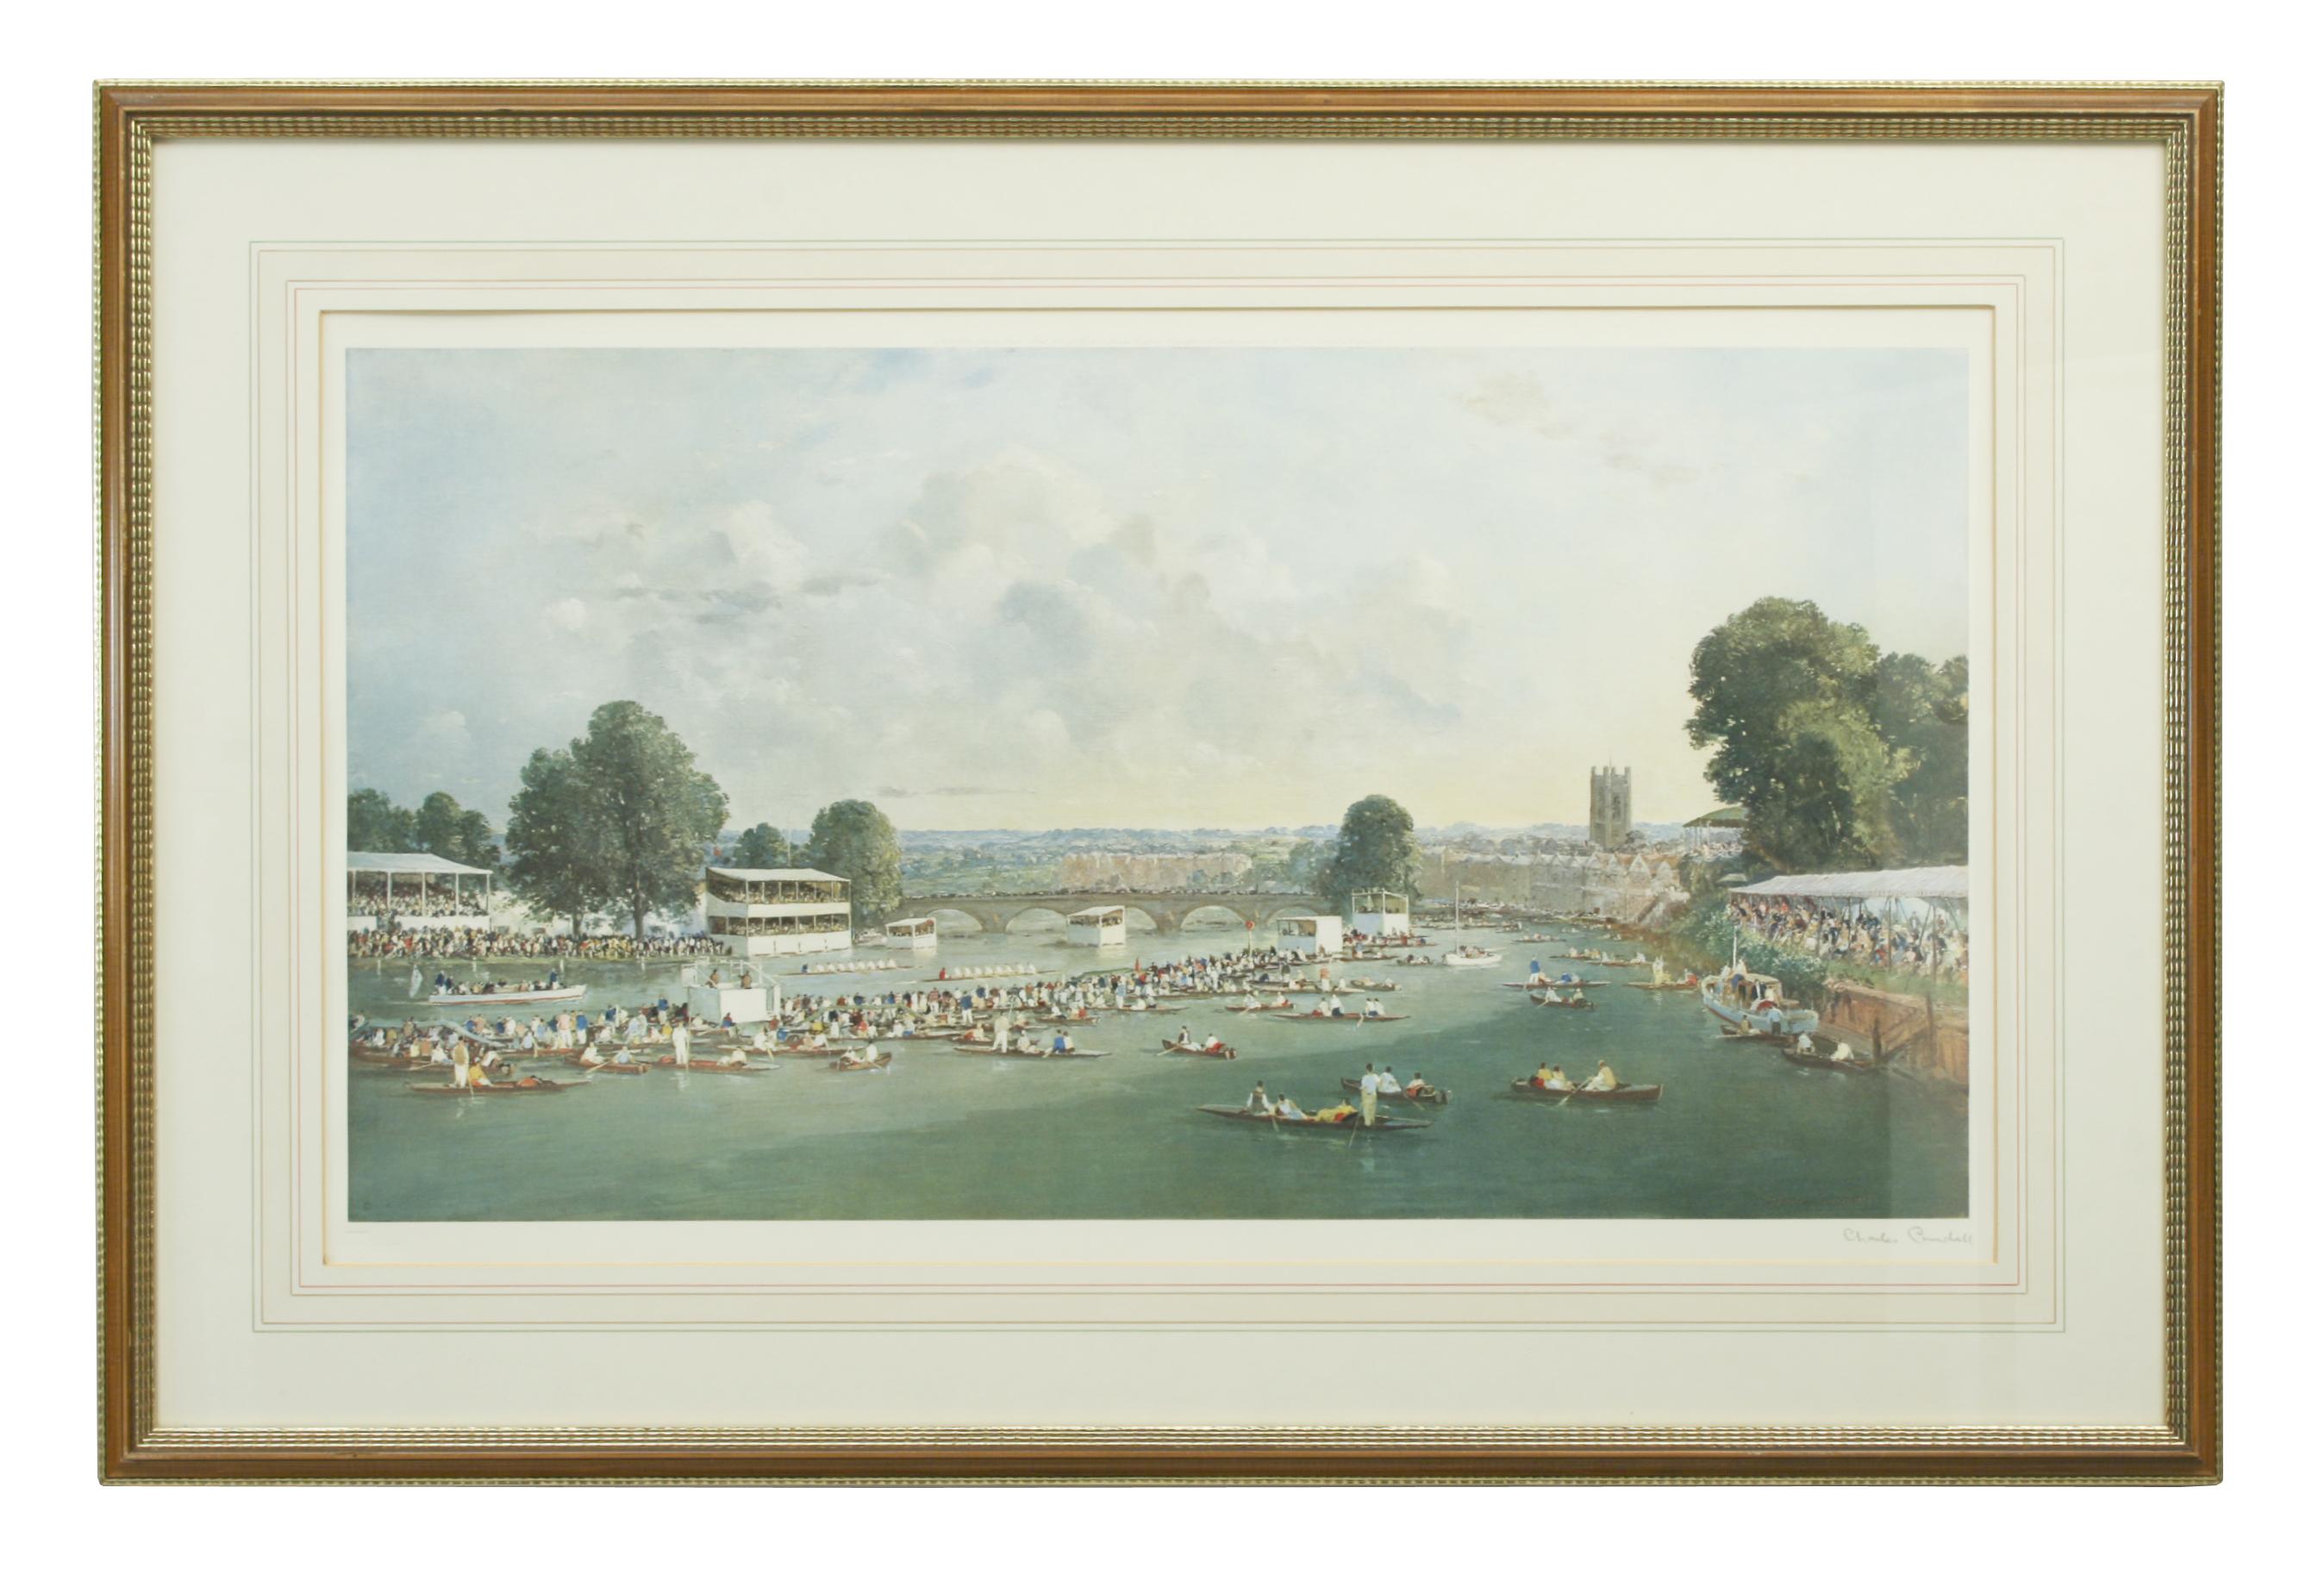 Henley, Royal Regatta by Charles Cundall. River Pageant.
A large colourful rowing picture of Henley Regatta by Charles E. Cundall. This charming picture illustrates the romantic view of Henley in days gone by. The river is overcrowded with people